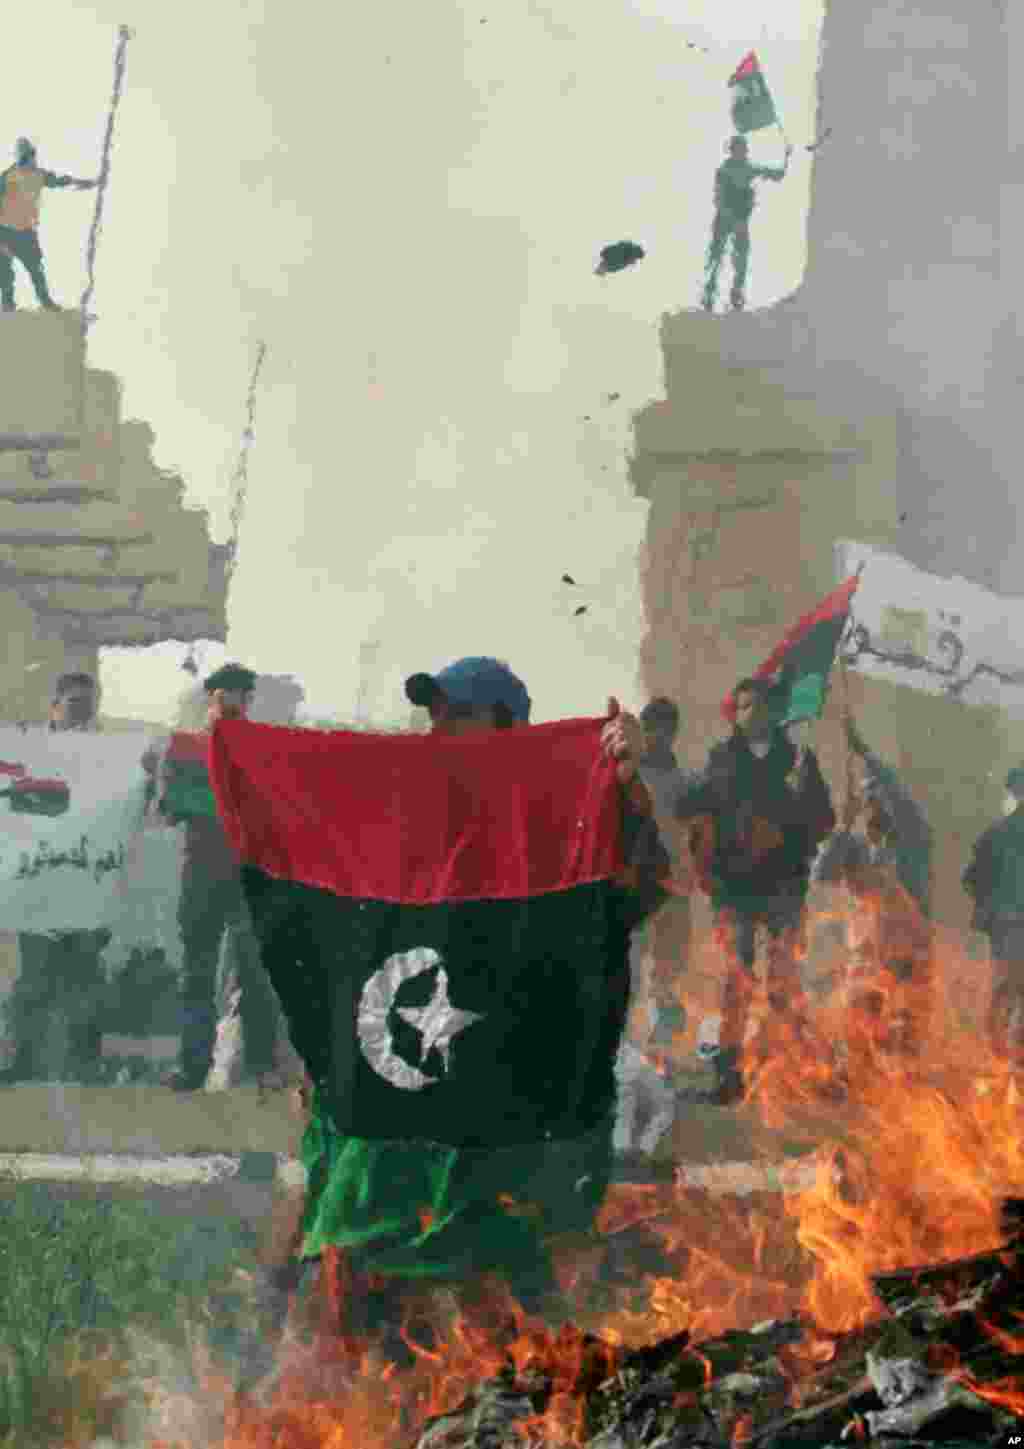 Protesters burn pictures of Gaddafi and copies of the Green Book. (Reuters/Suhaib Salem)